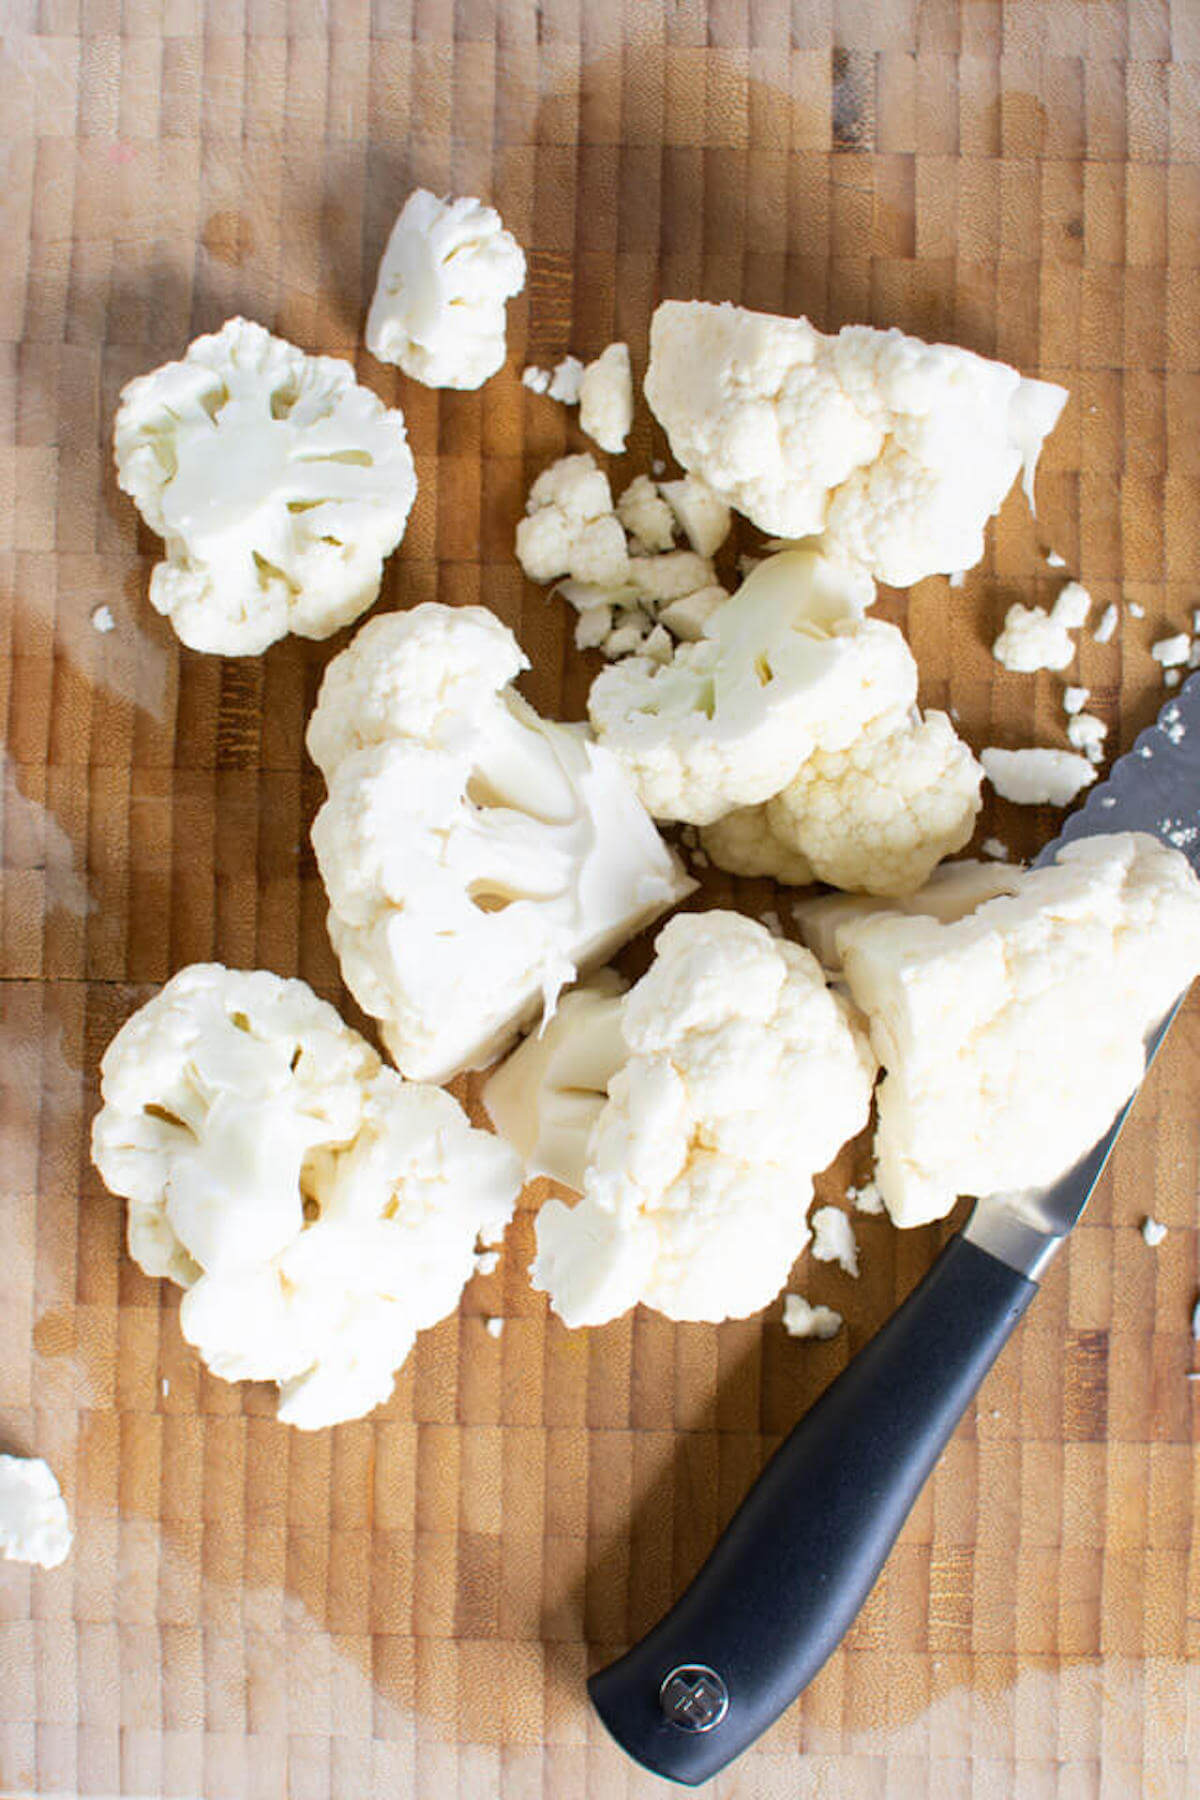 Cauliflower chopped into smaller pieces on cutting board, ready for food processor